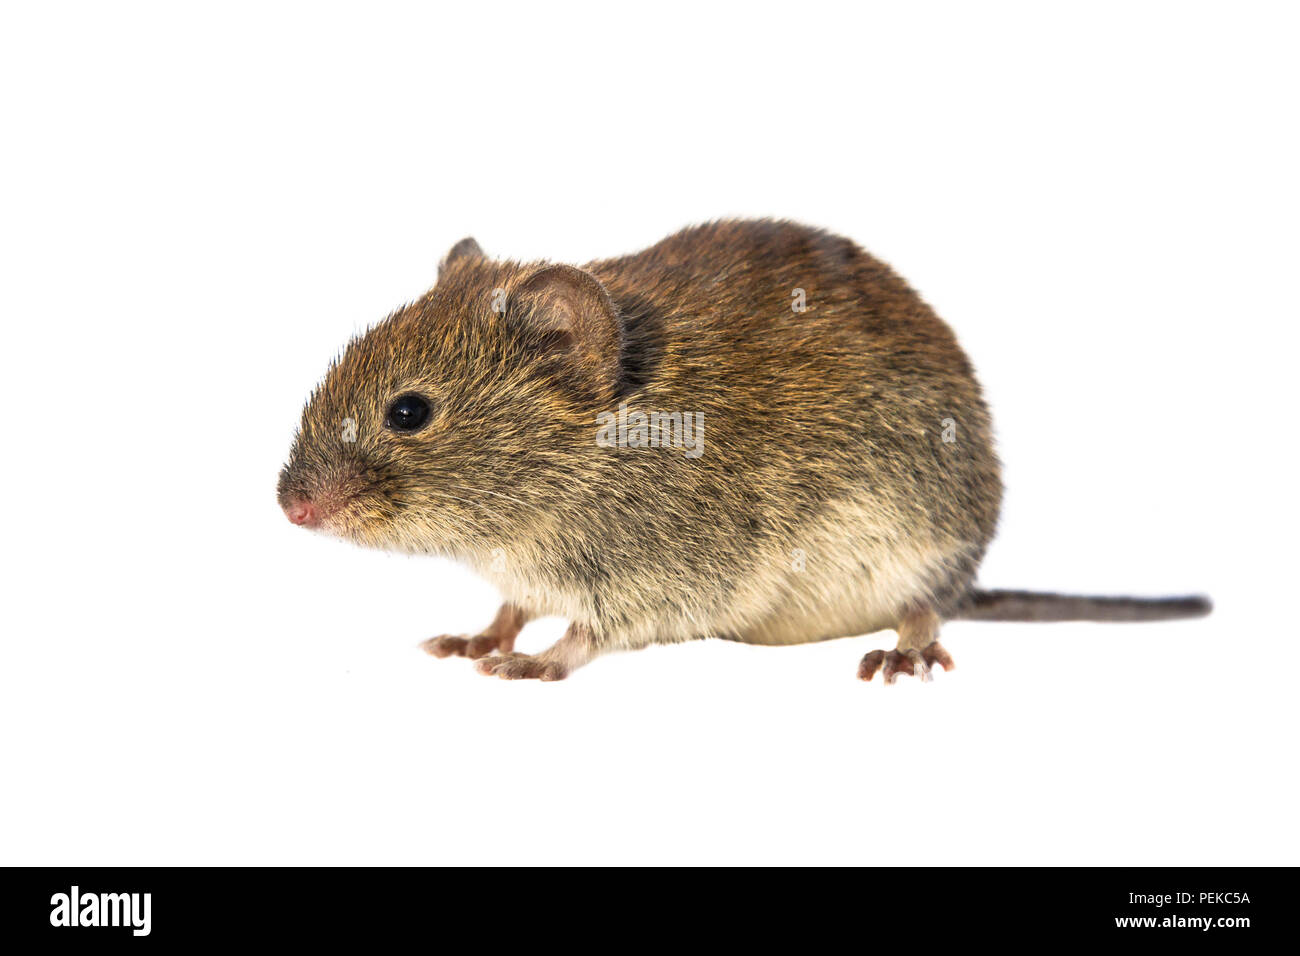 Bank vole (Myodes glareolus; formerly Clethrionomys glareolus). Small vole with red-brown fur walking on white background Stock Photo